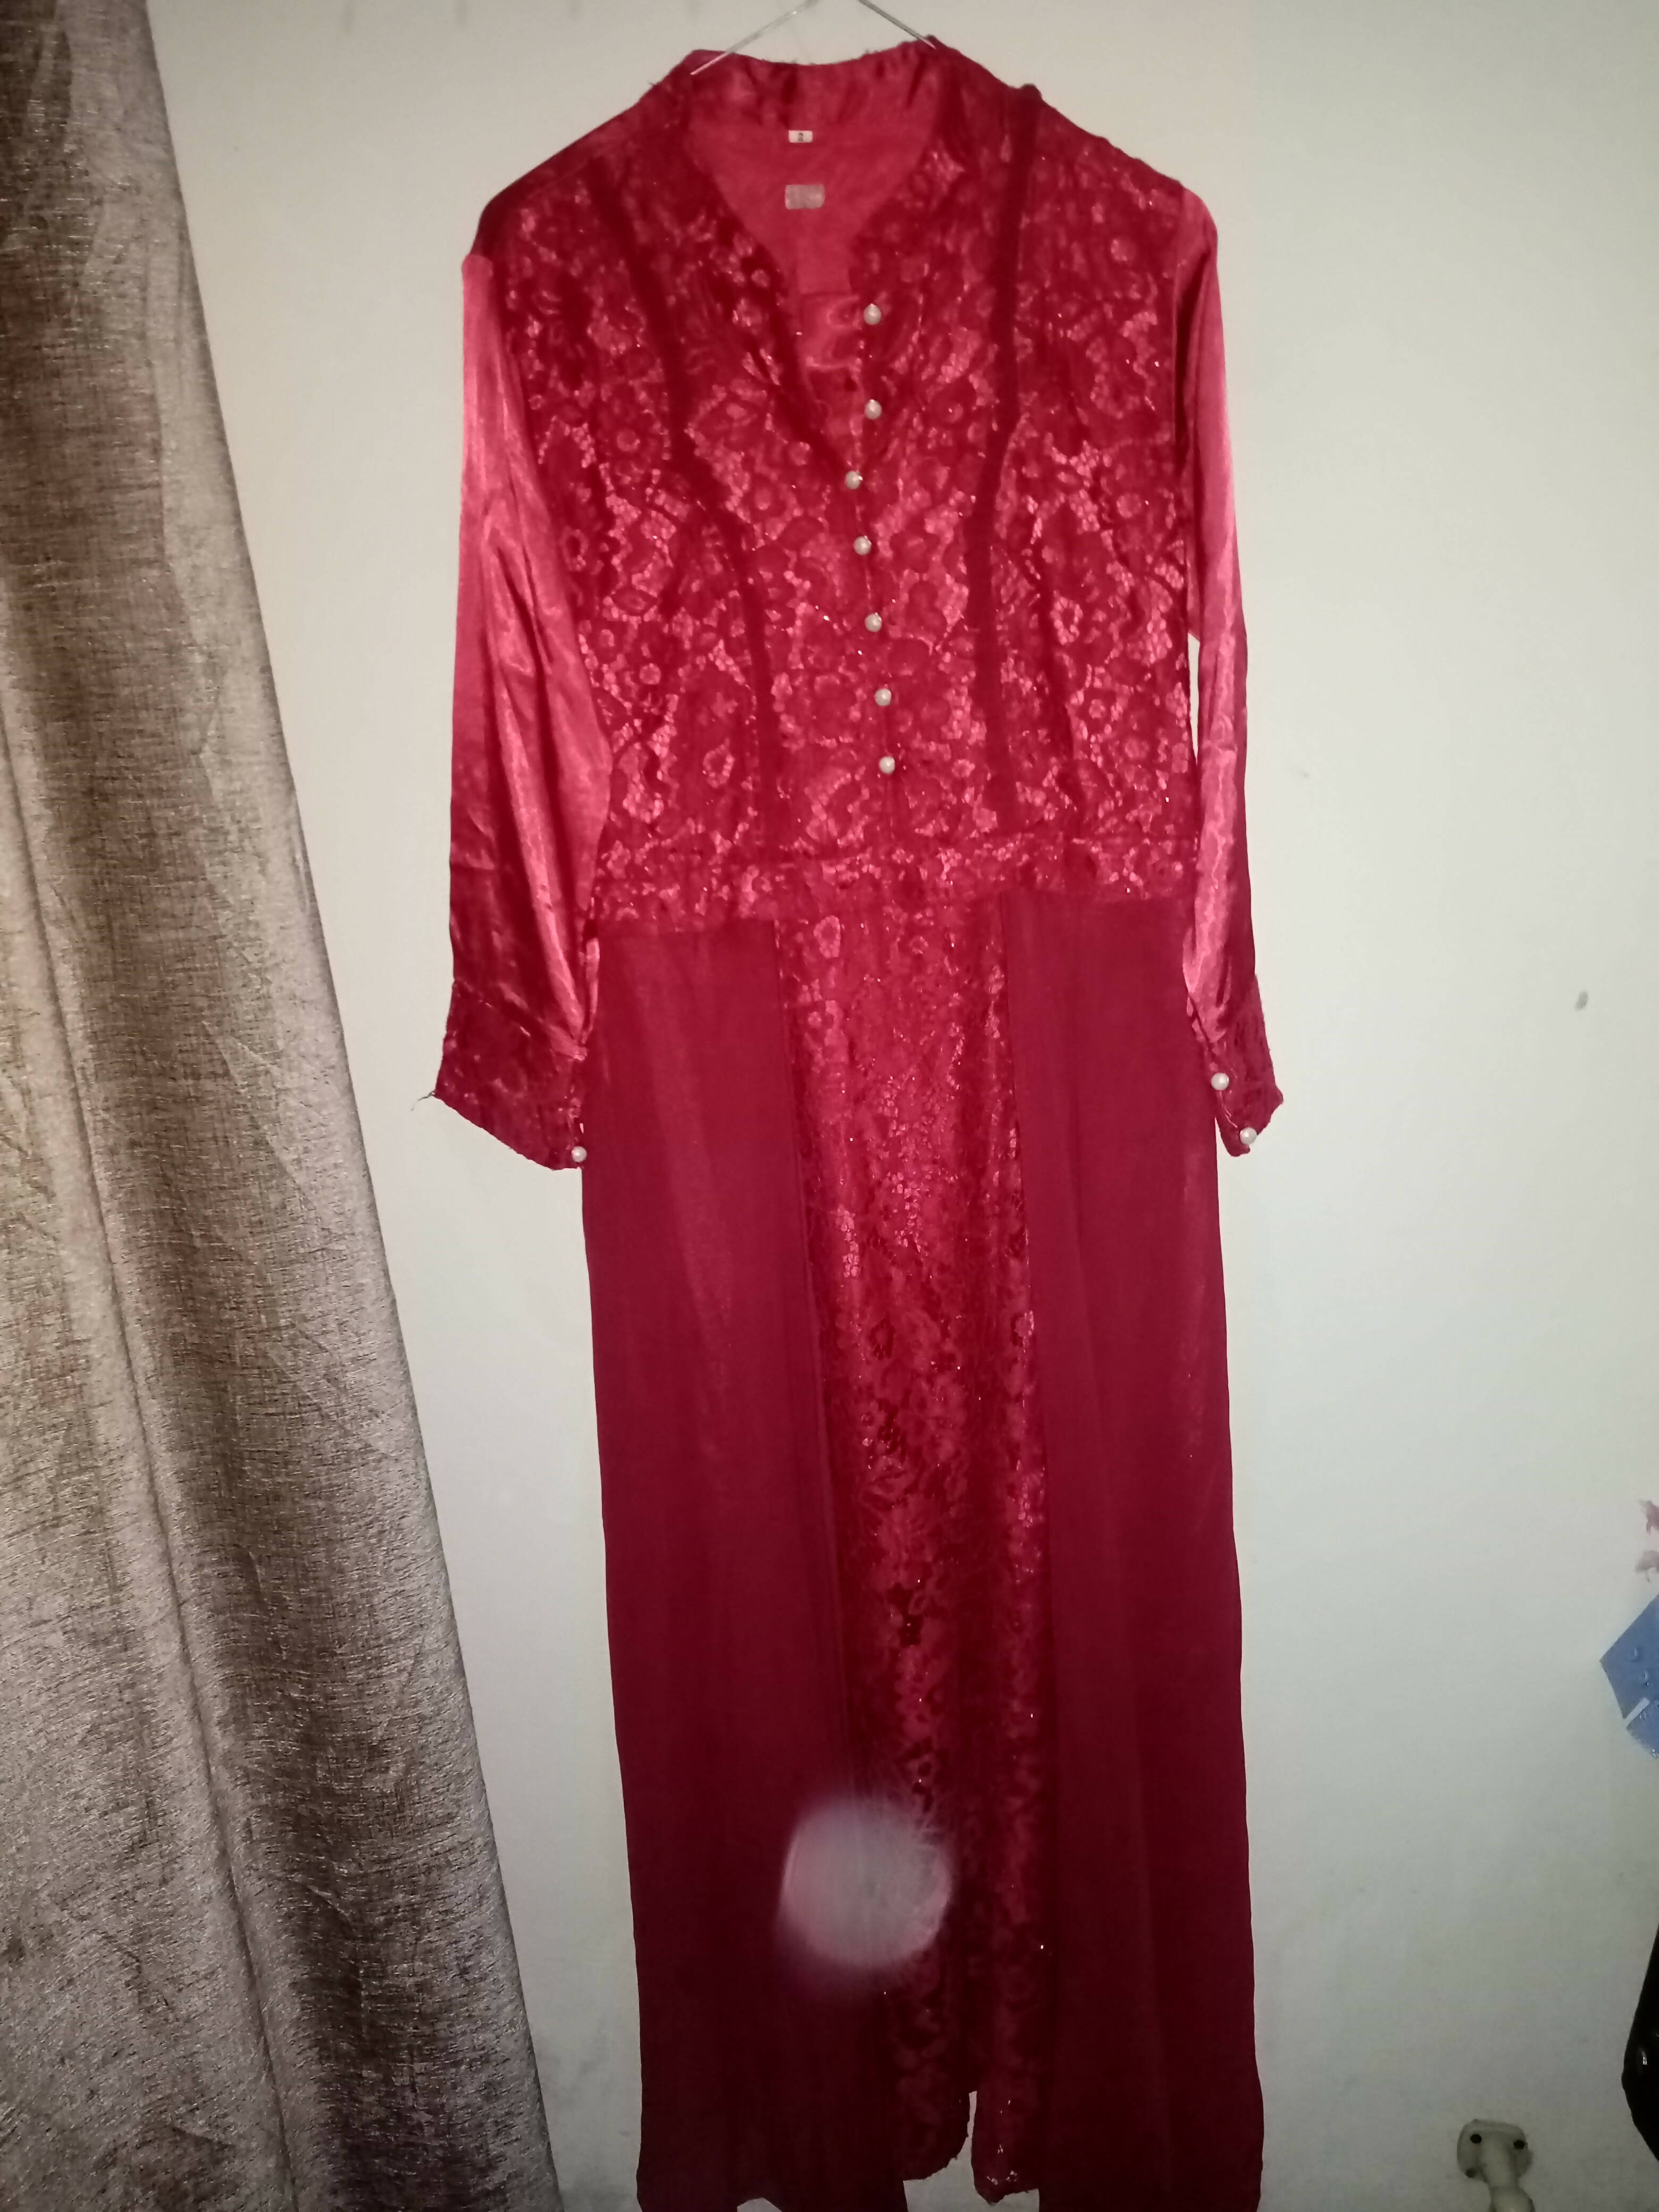 Red Maxi | Women Frocks & Maxi | Worn Once